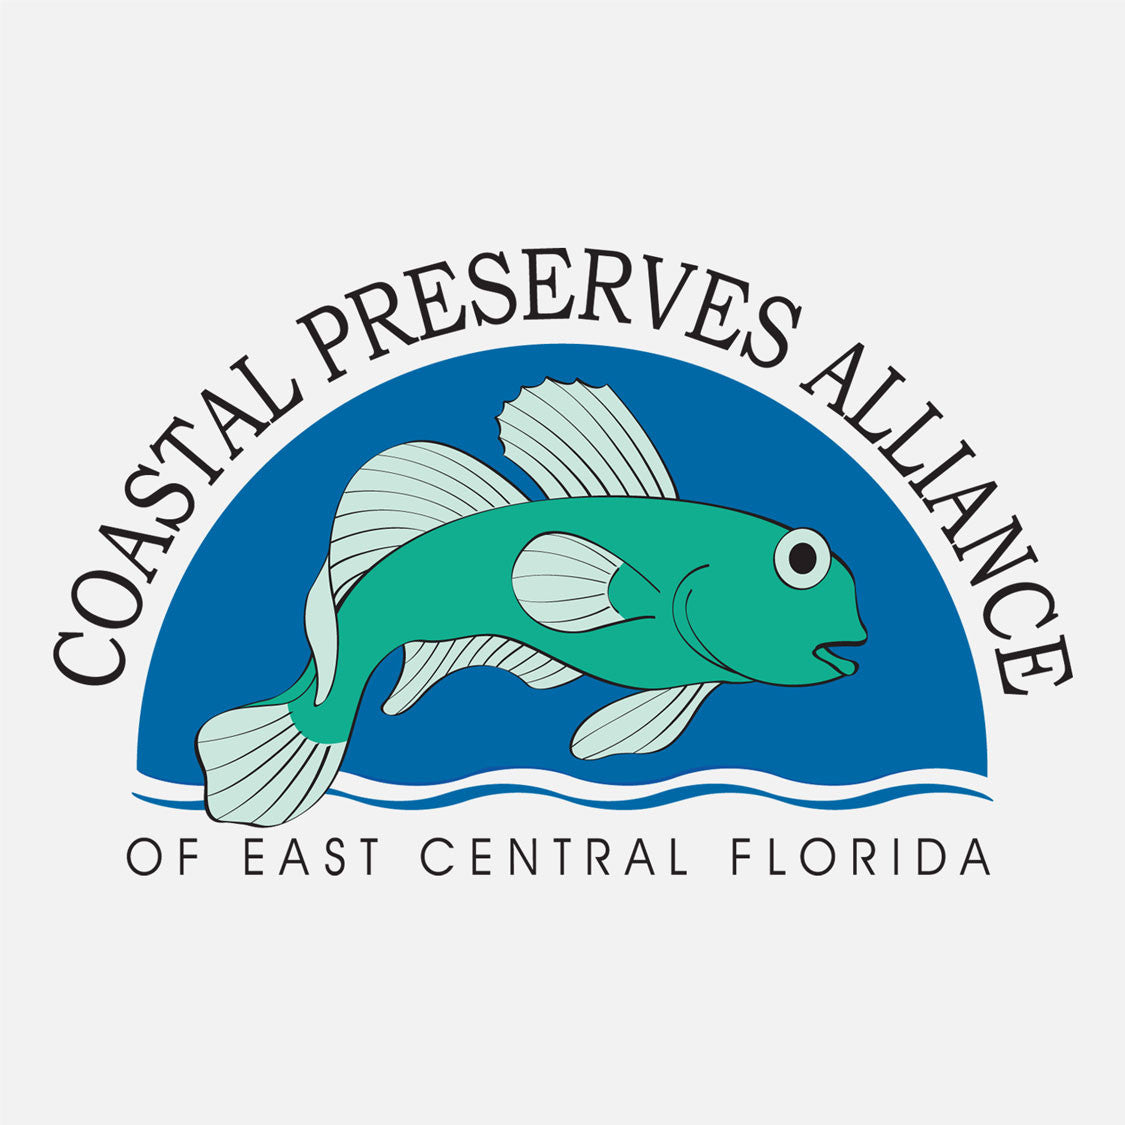 Recognized by the Florida Park Service as the Citizen Support Organization for the St. Sebastian River Preserve State Park in Fellsmere, Florida. The logo is a graphical depiction of a goby.